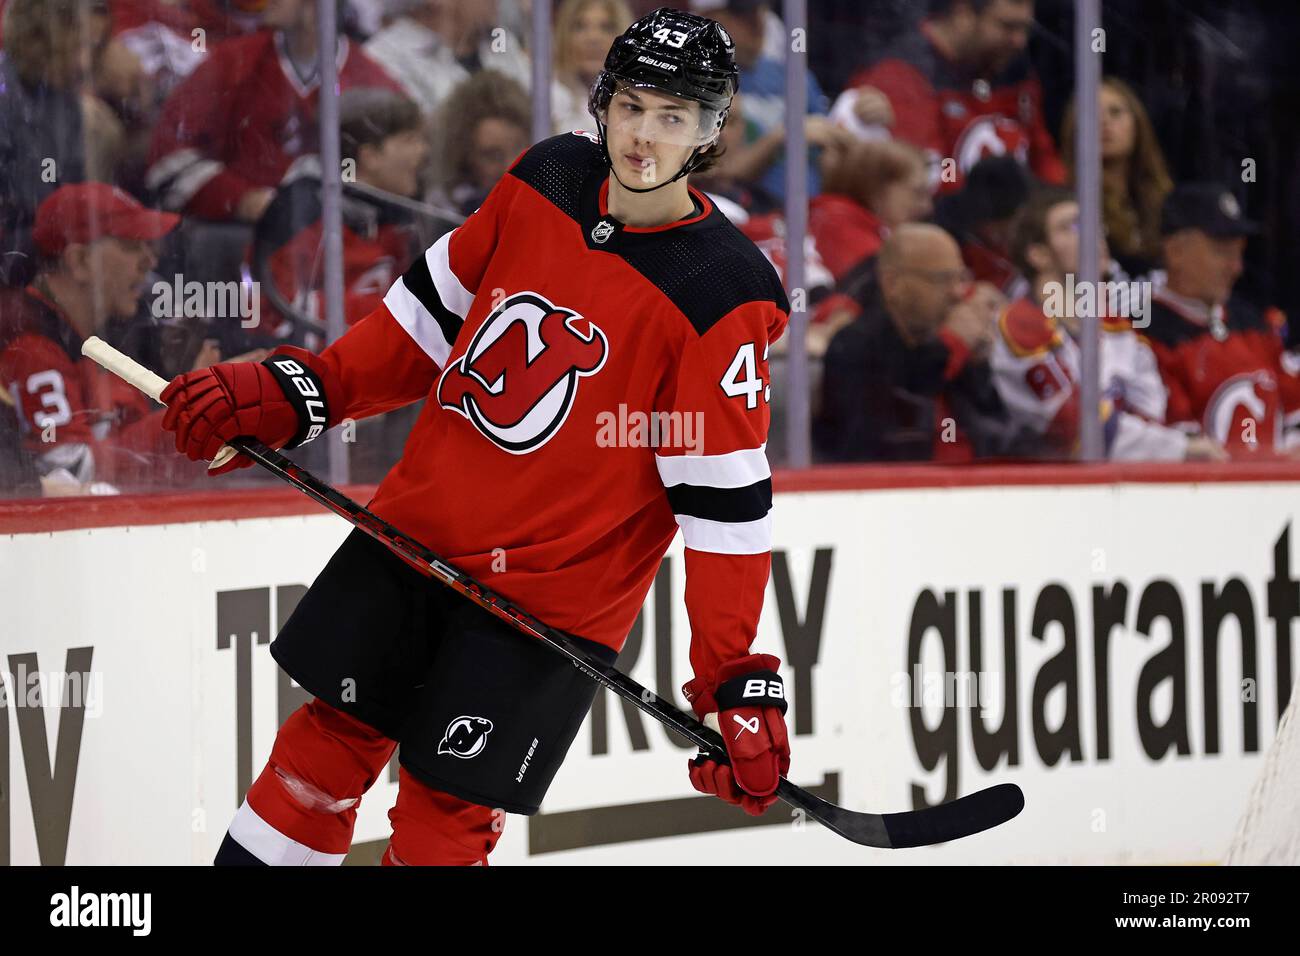 Luke Hughes Scores Stunning Overtime Winner as New Jersey Devils Defeat  Washington Capitals, 5-4 - All About The Jersey